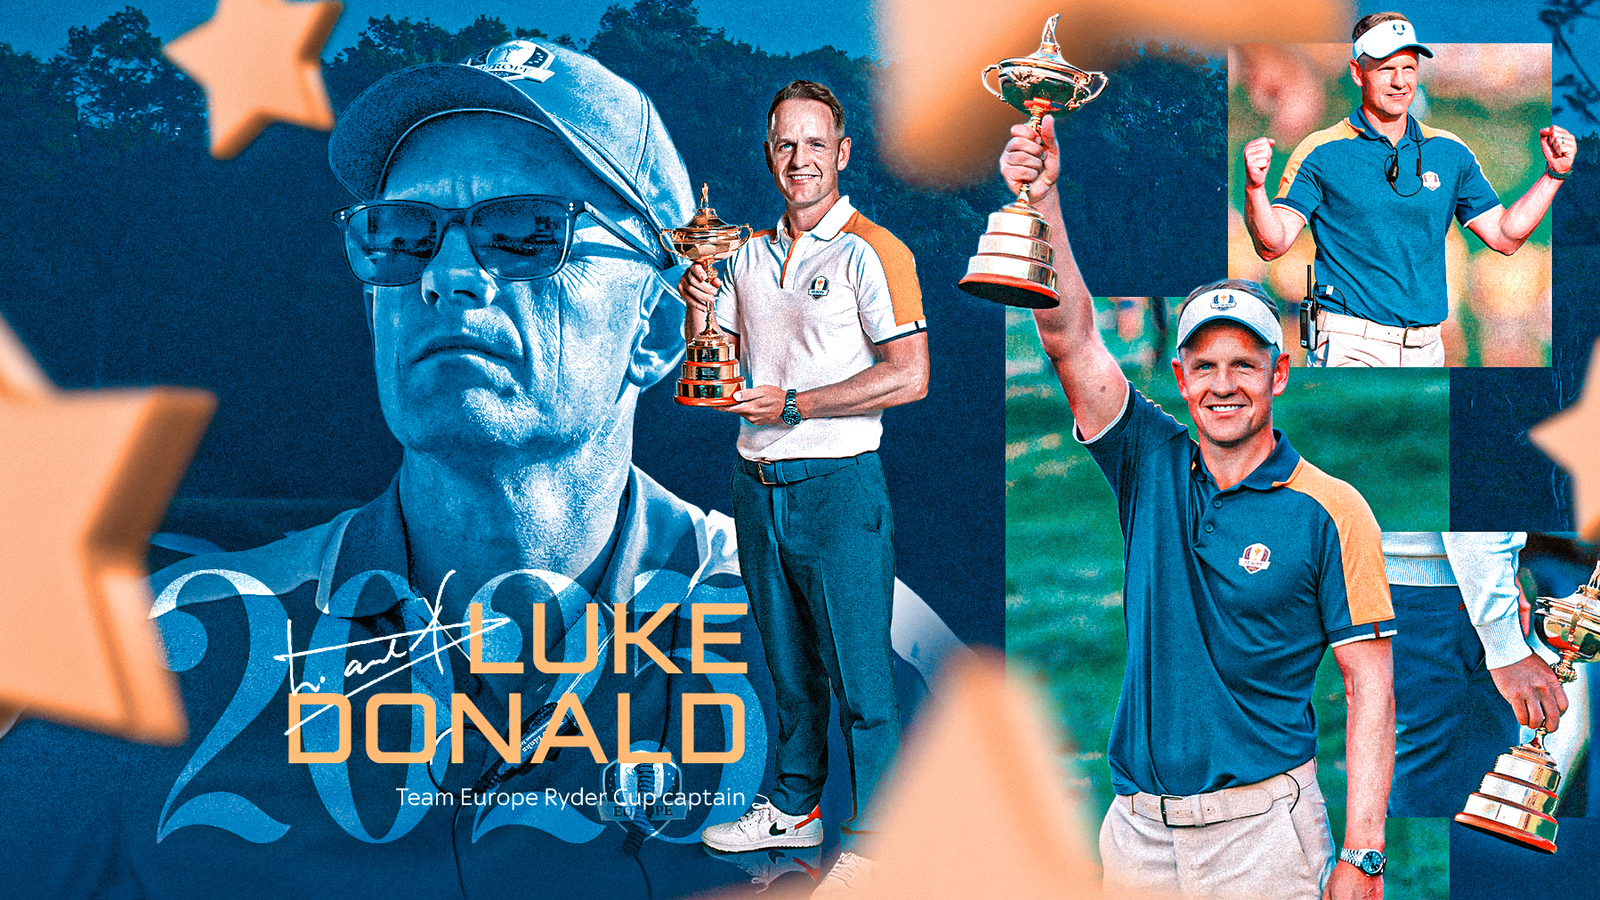 Luke Donald named as Team Europe’s Ryder Cup captain for 2025 contest at Bethpage Black